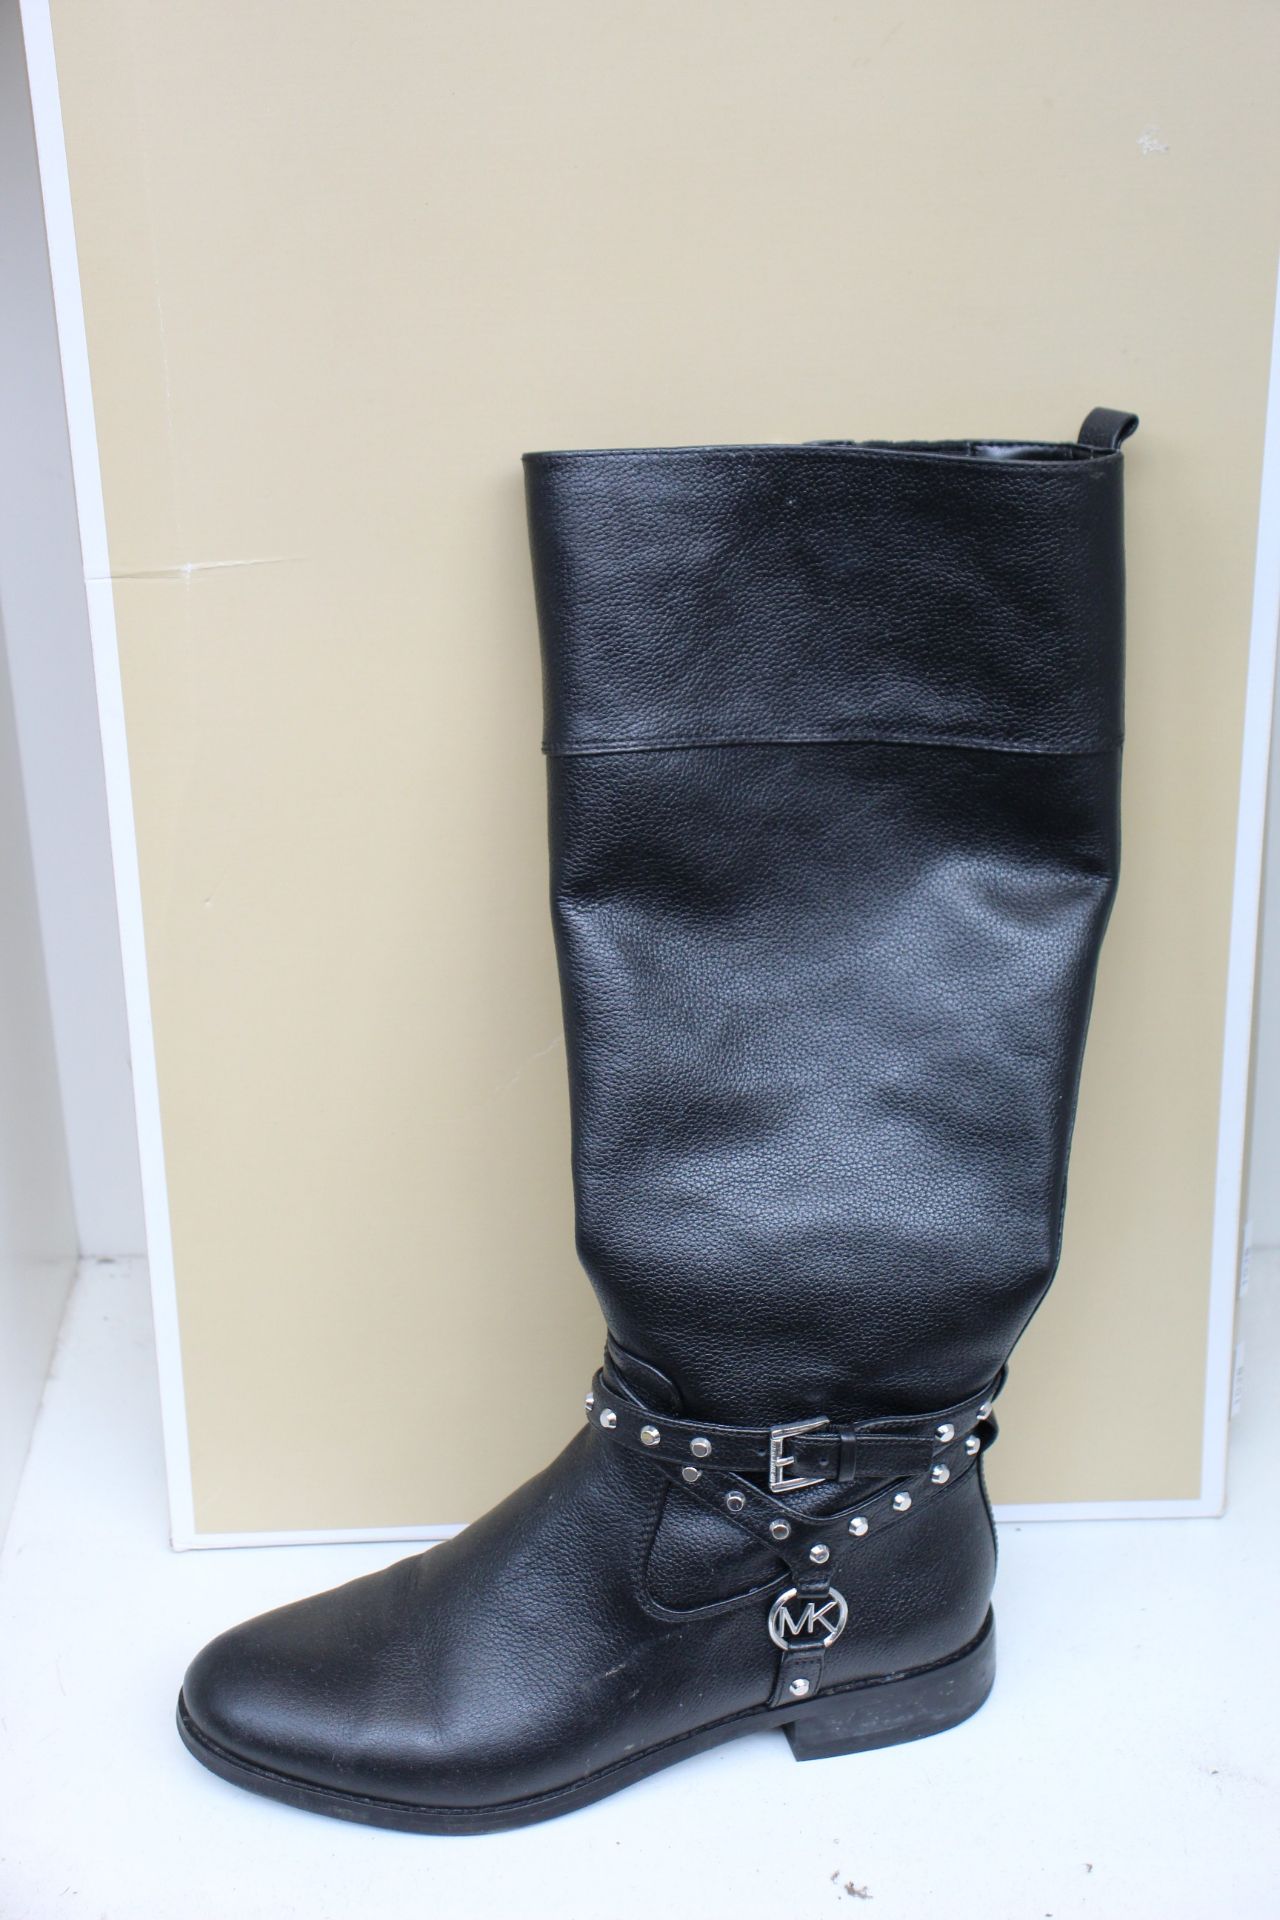 A pair of pre-owned Michael Kors Preston boots (UK 8.5).